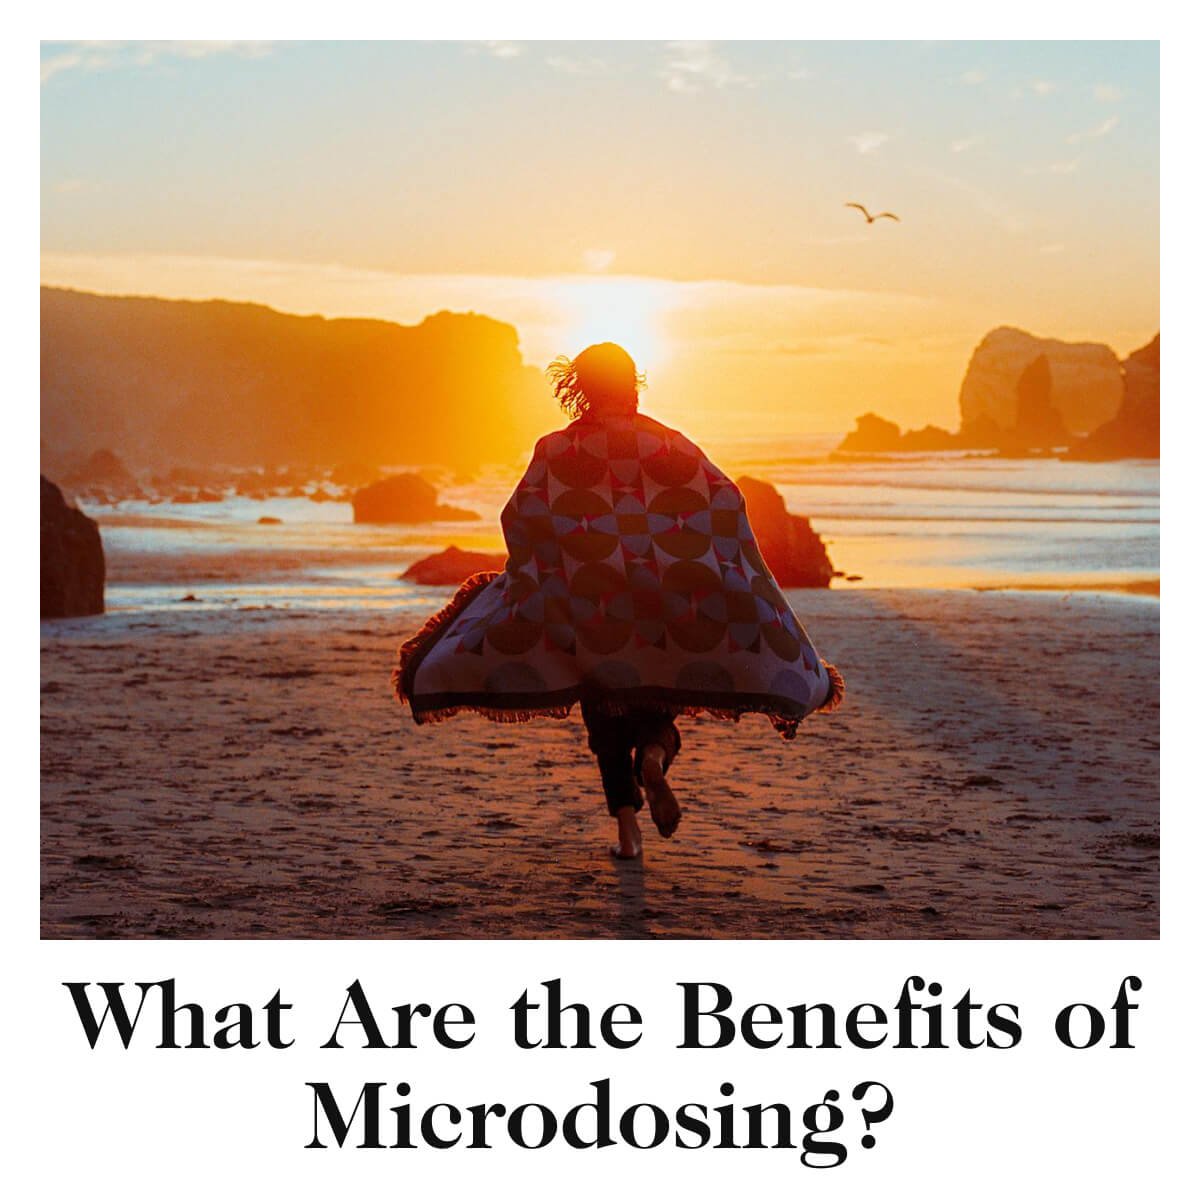 What Are the Benefits of Microdosing?